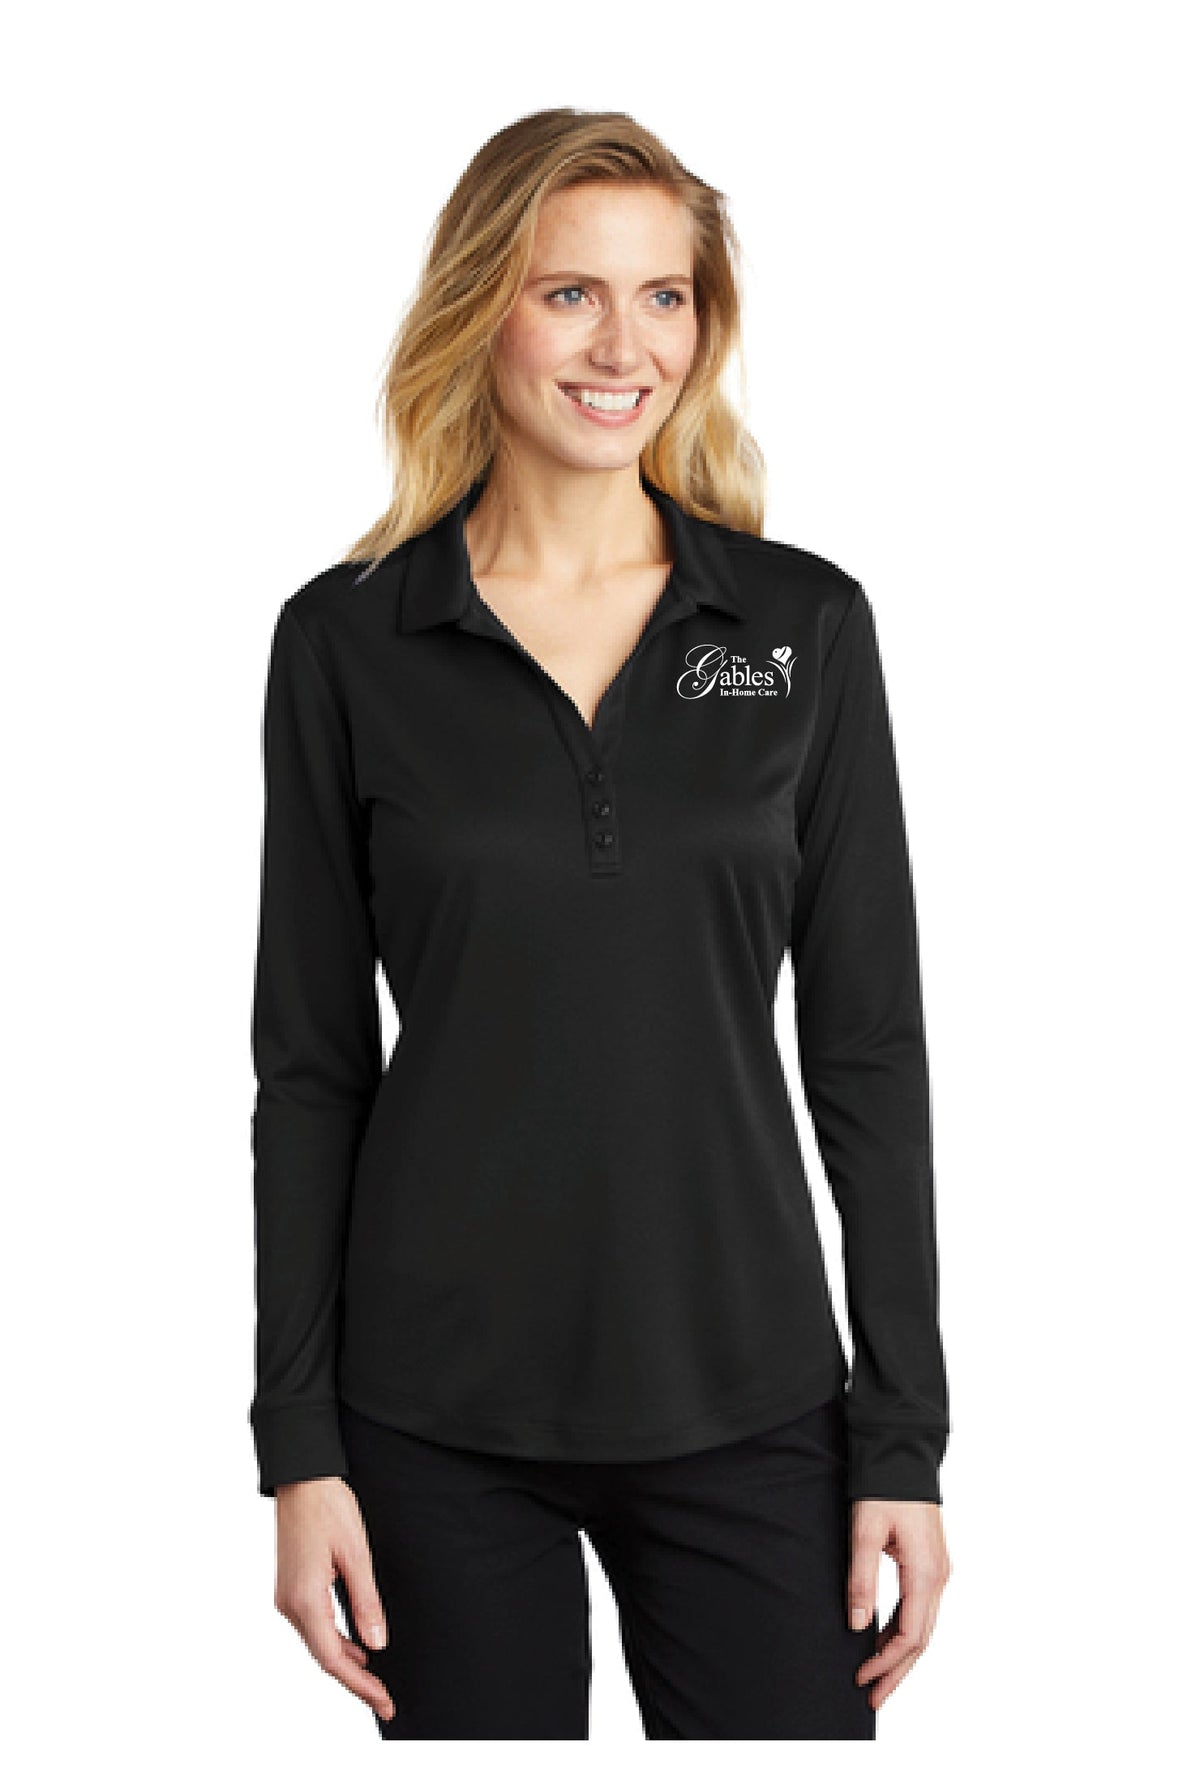 The Gables - L540LS Ladies Black Silk Touch™Performance Long Sleeve Polo